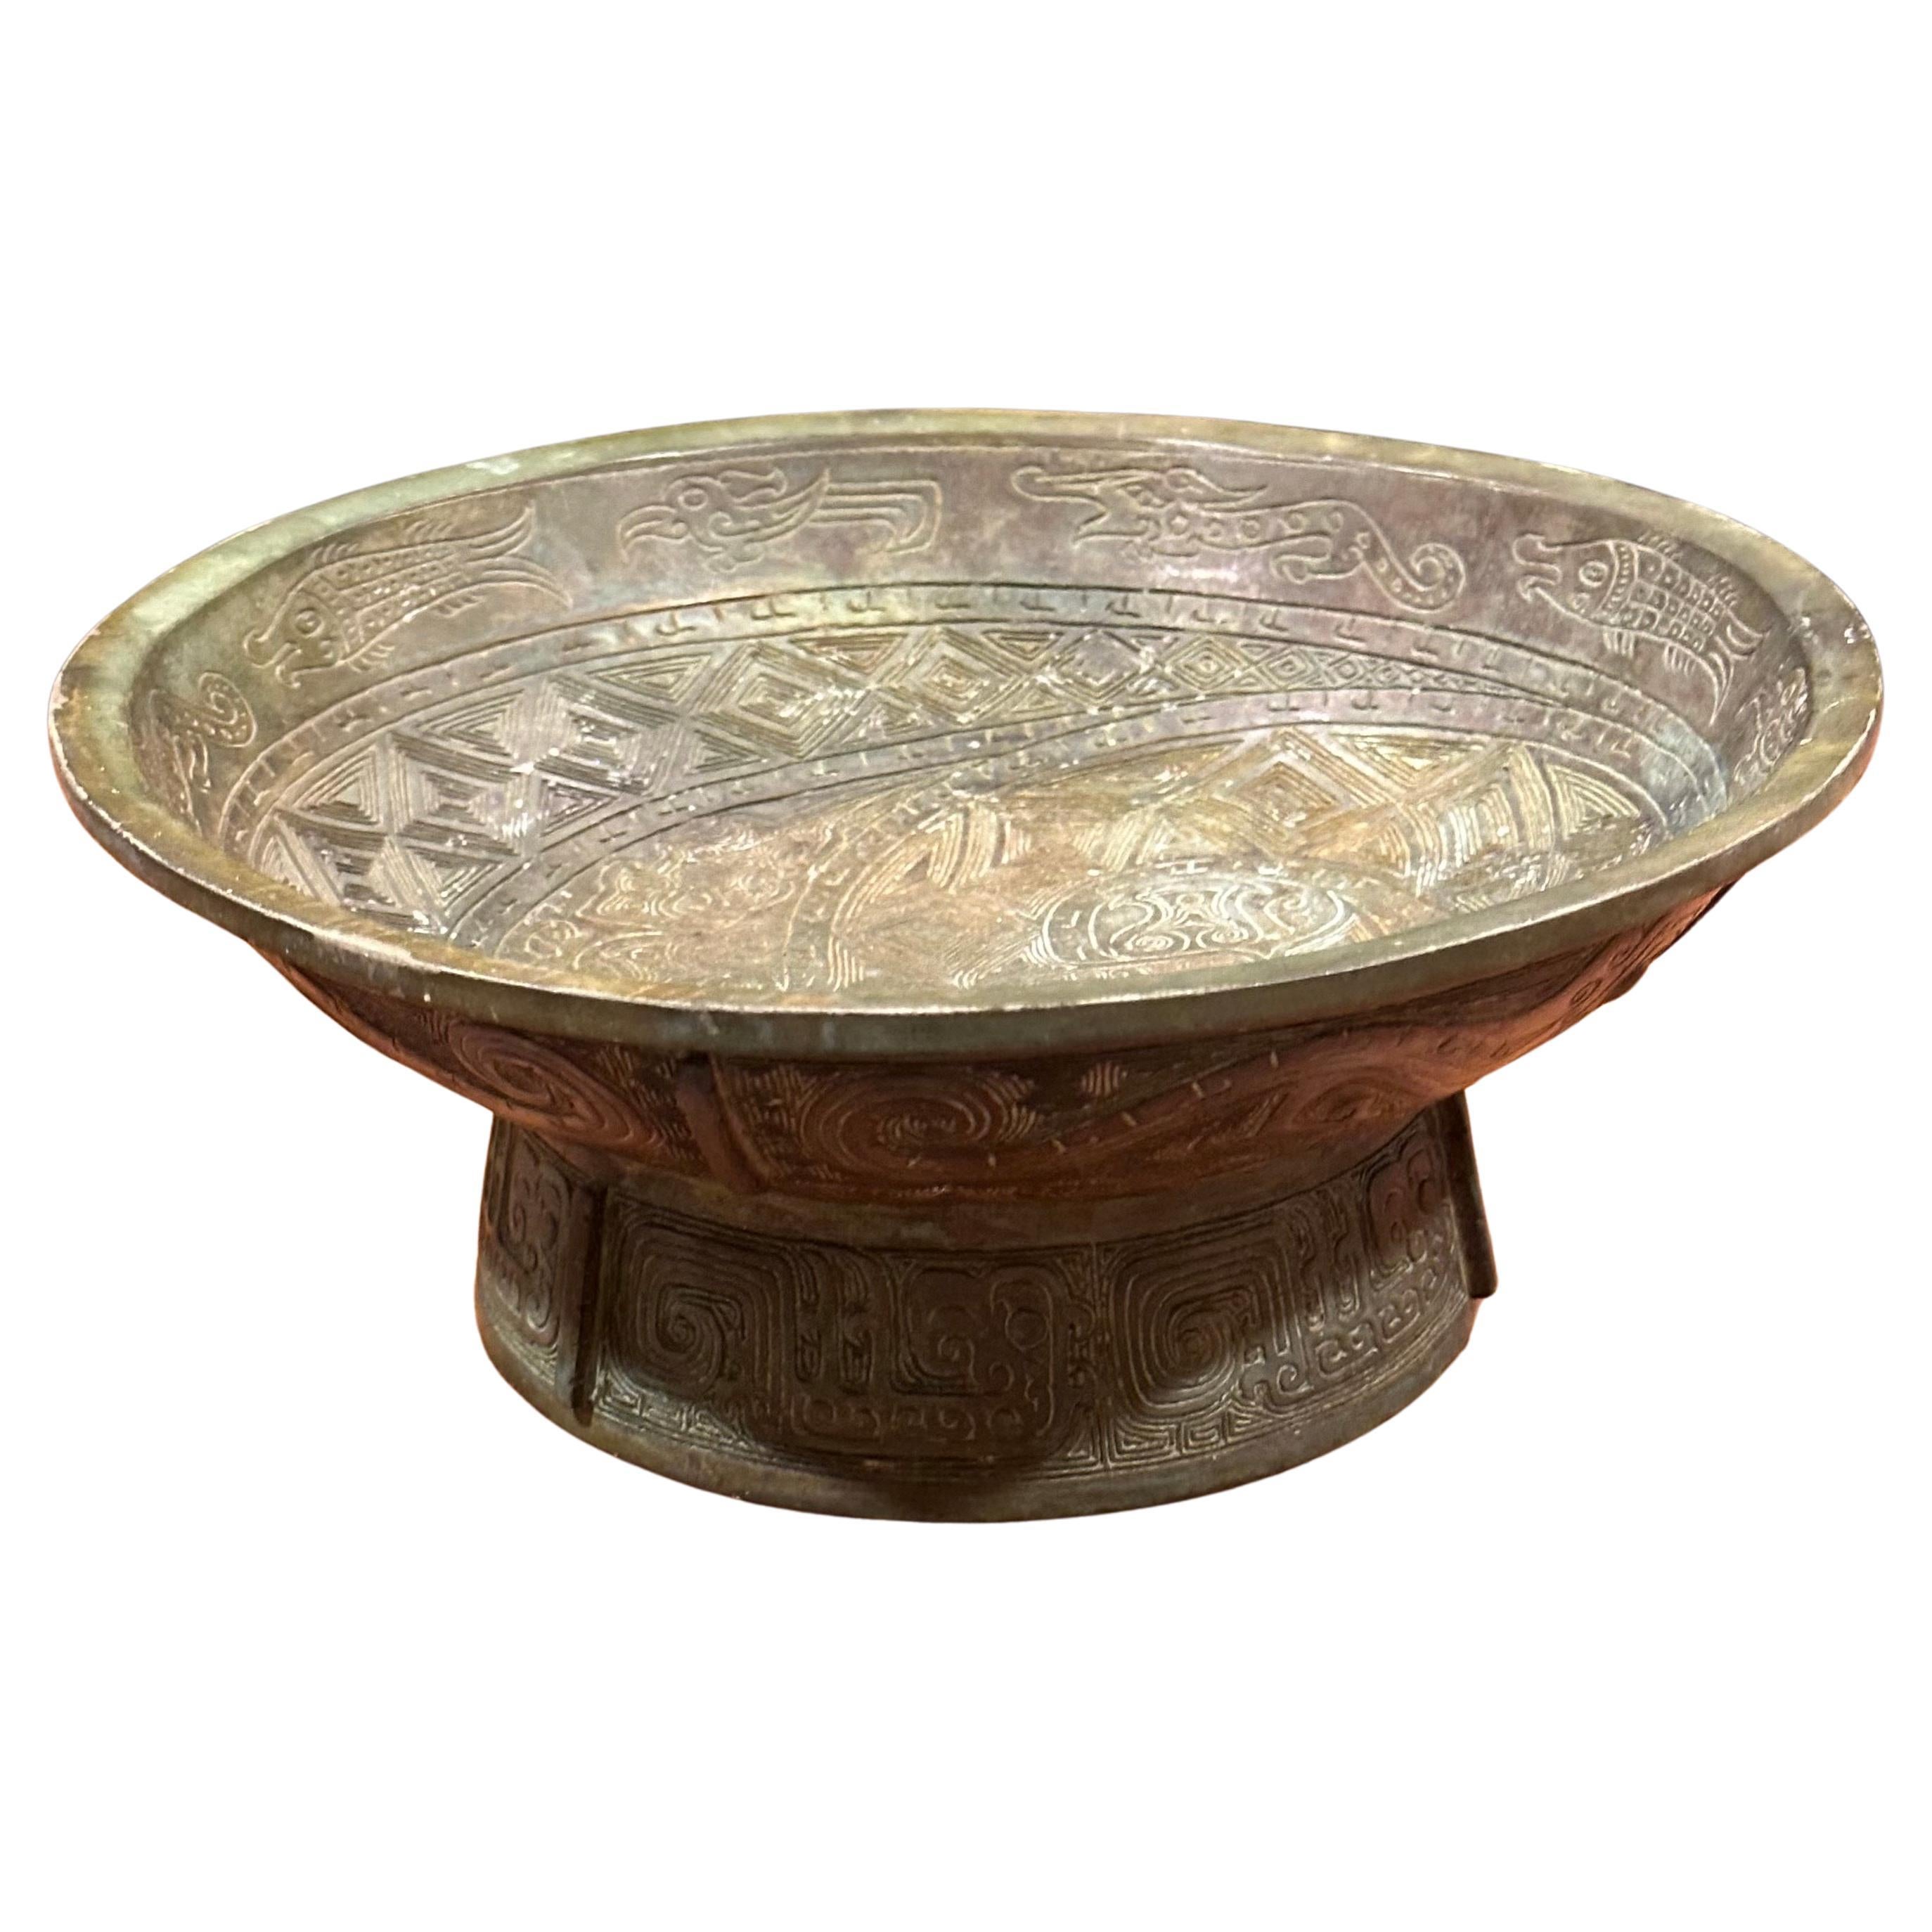 Vintage bronze Chinese pedestal bowl, circa 1950s. The bowl is in good vintage condition and measures 10